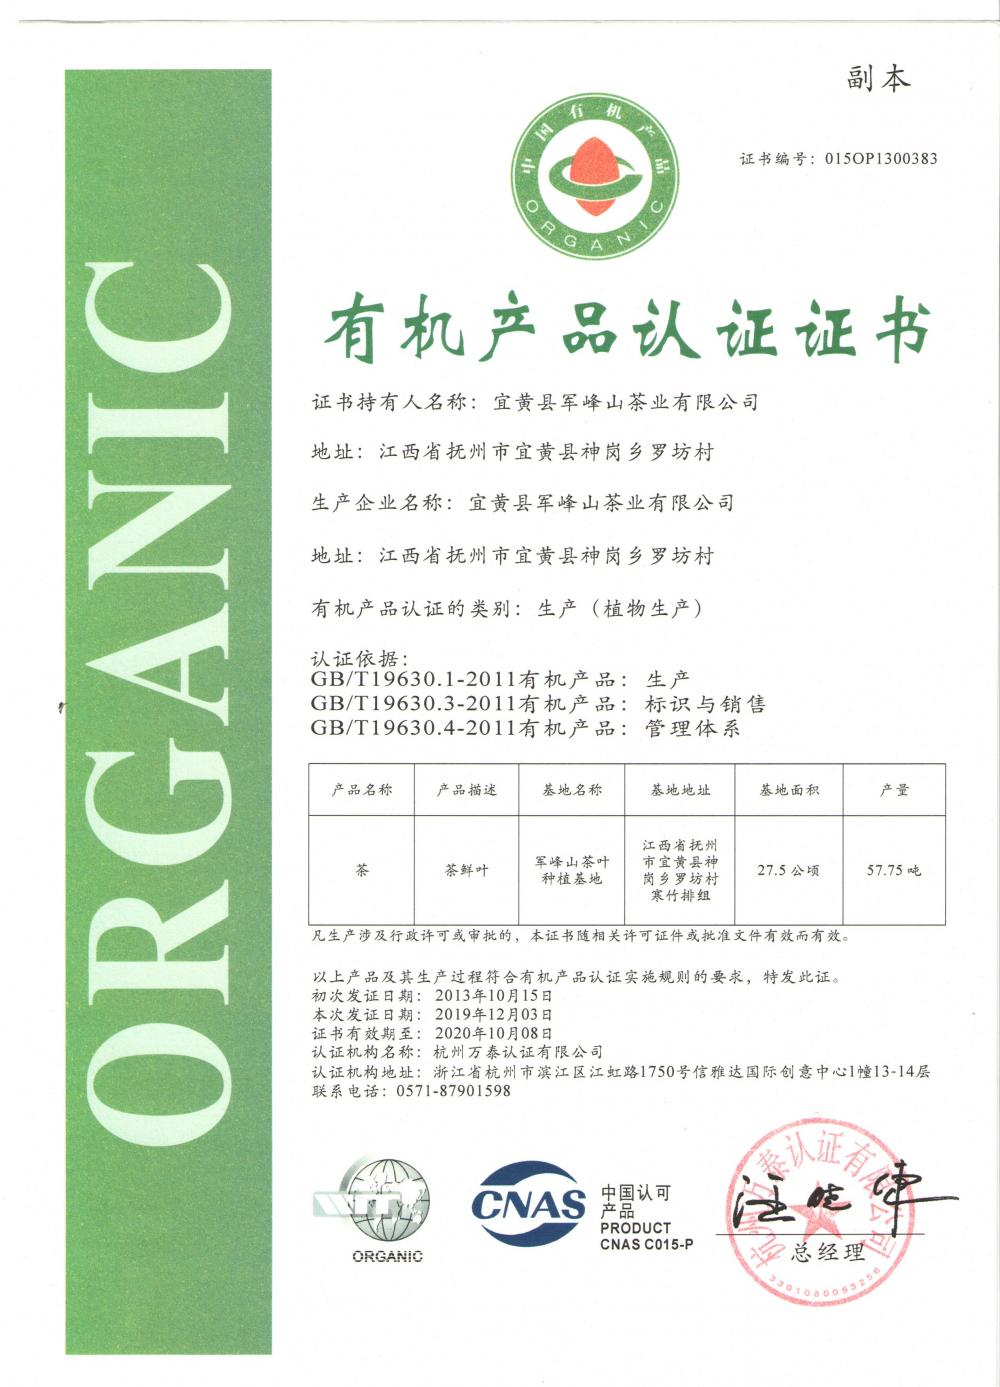 Organic certificate. Production